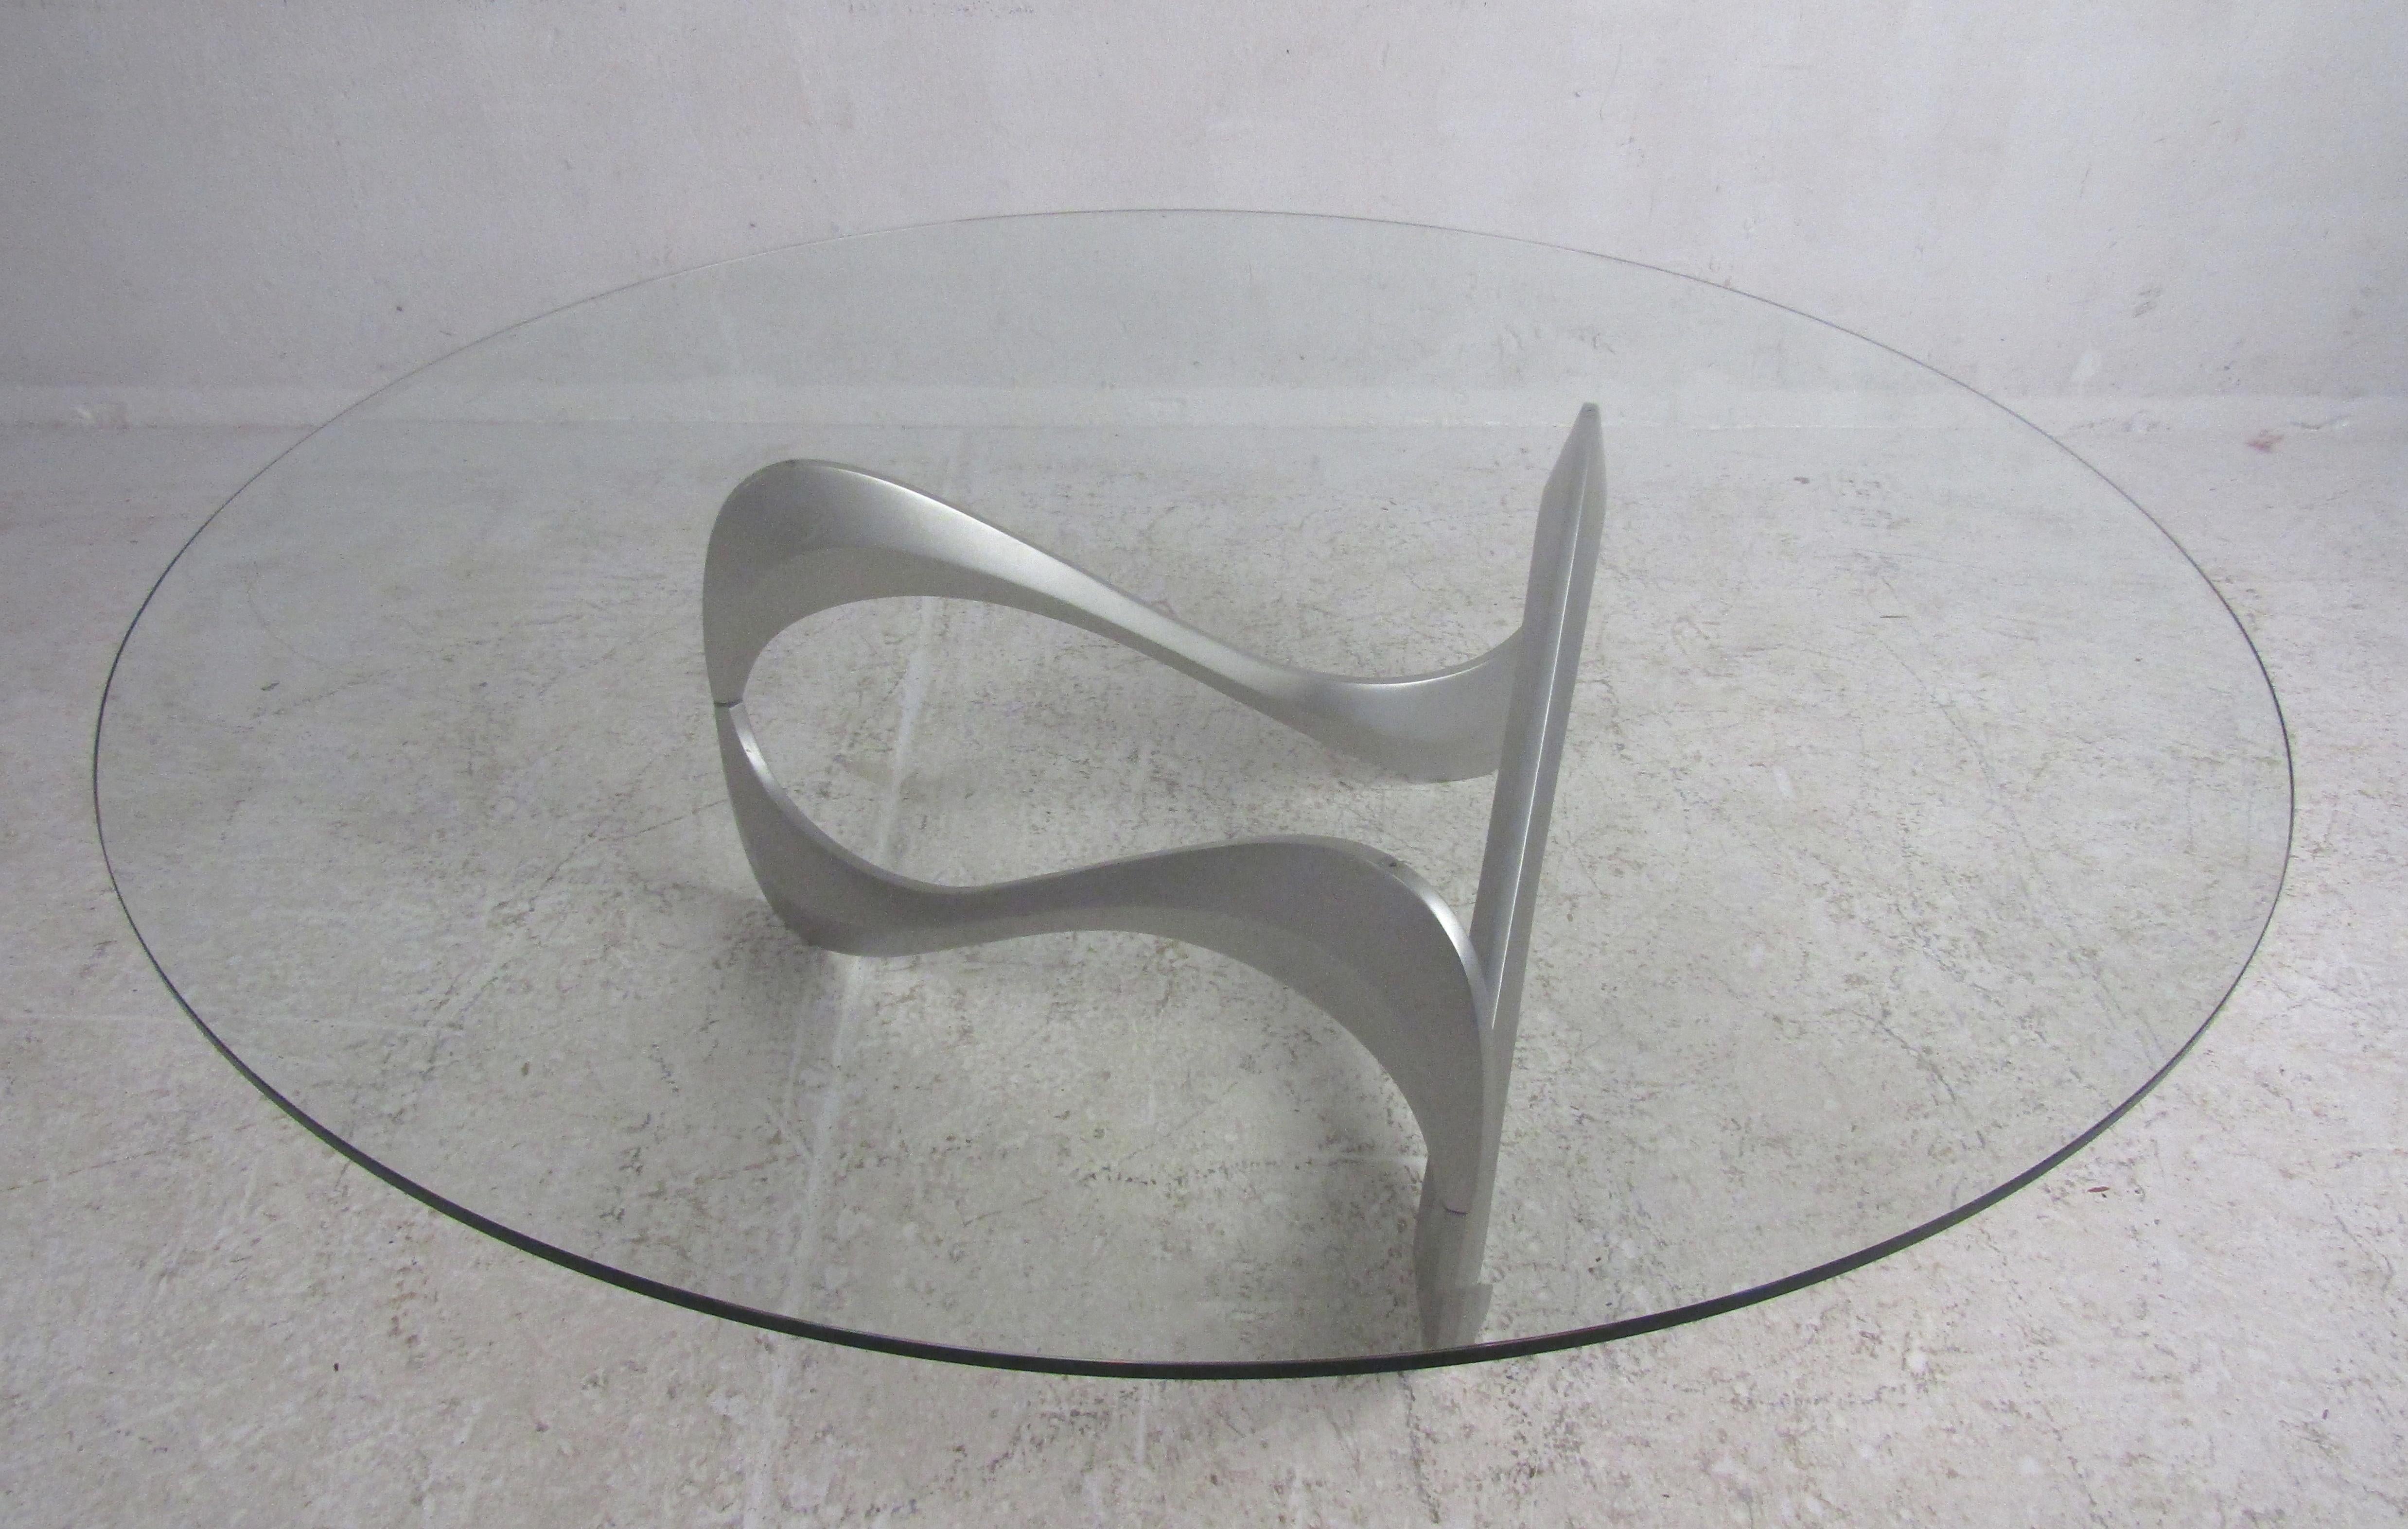 This amazing vintage modern coffee table boasts a thick circular glass top with beveled edges. Sleek design with a scribble shaped, sculped metal base. This lovely table makes the perfect addition to any home, business, or office. Please confirm the